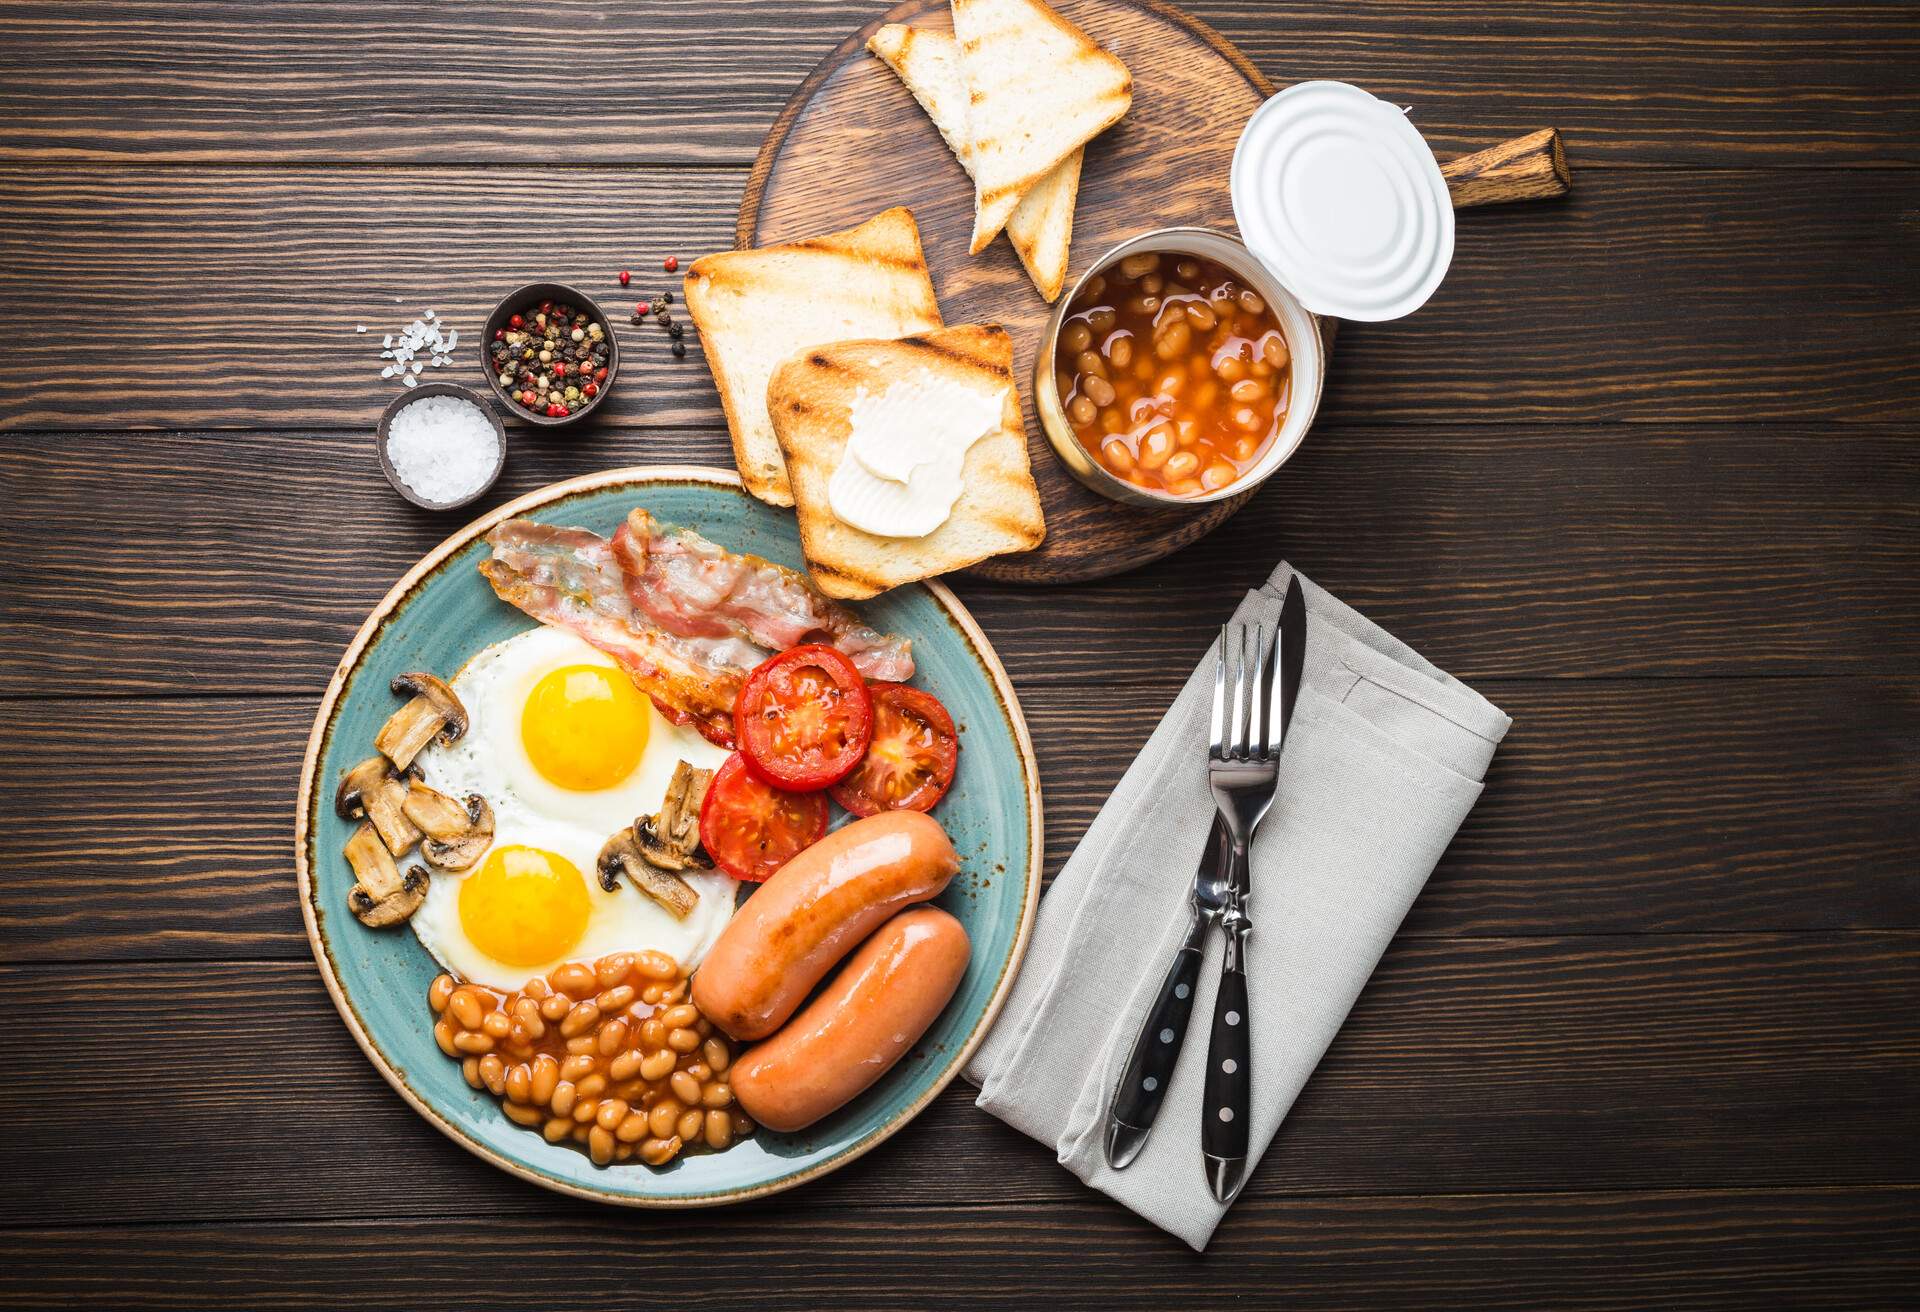 Full English breakfast with fried eggs, sausages, bacon, beans, mushrooms, tomatoes on a plate, bread toasts with butter. Traditional British meal, top view, rustic wooden background